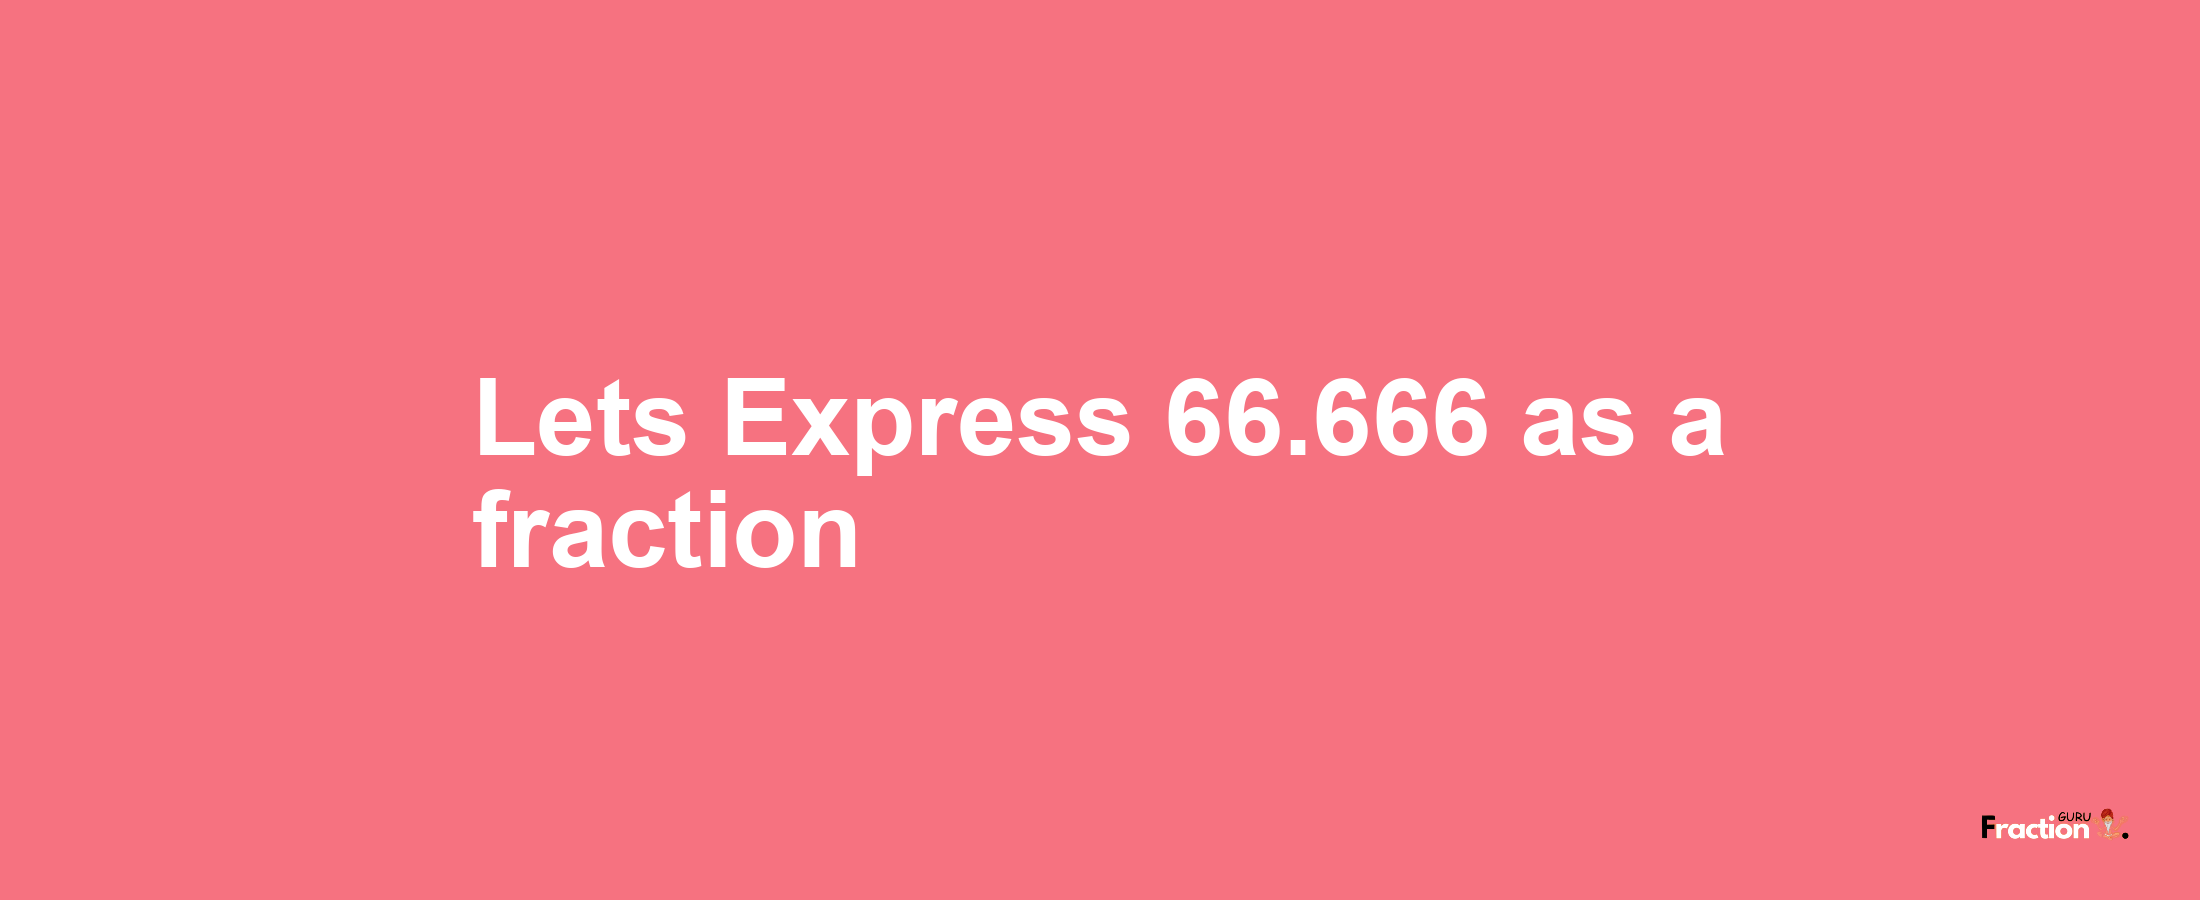 Lets Express 66.666 as afraction